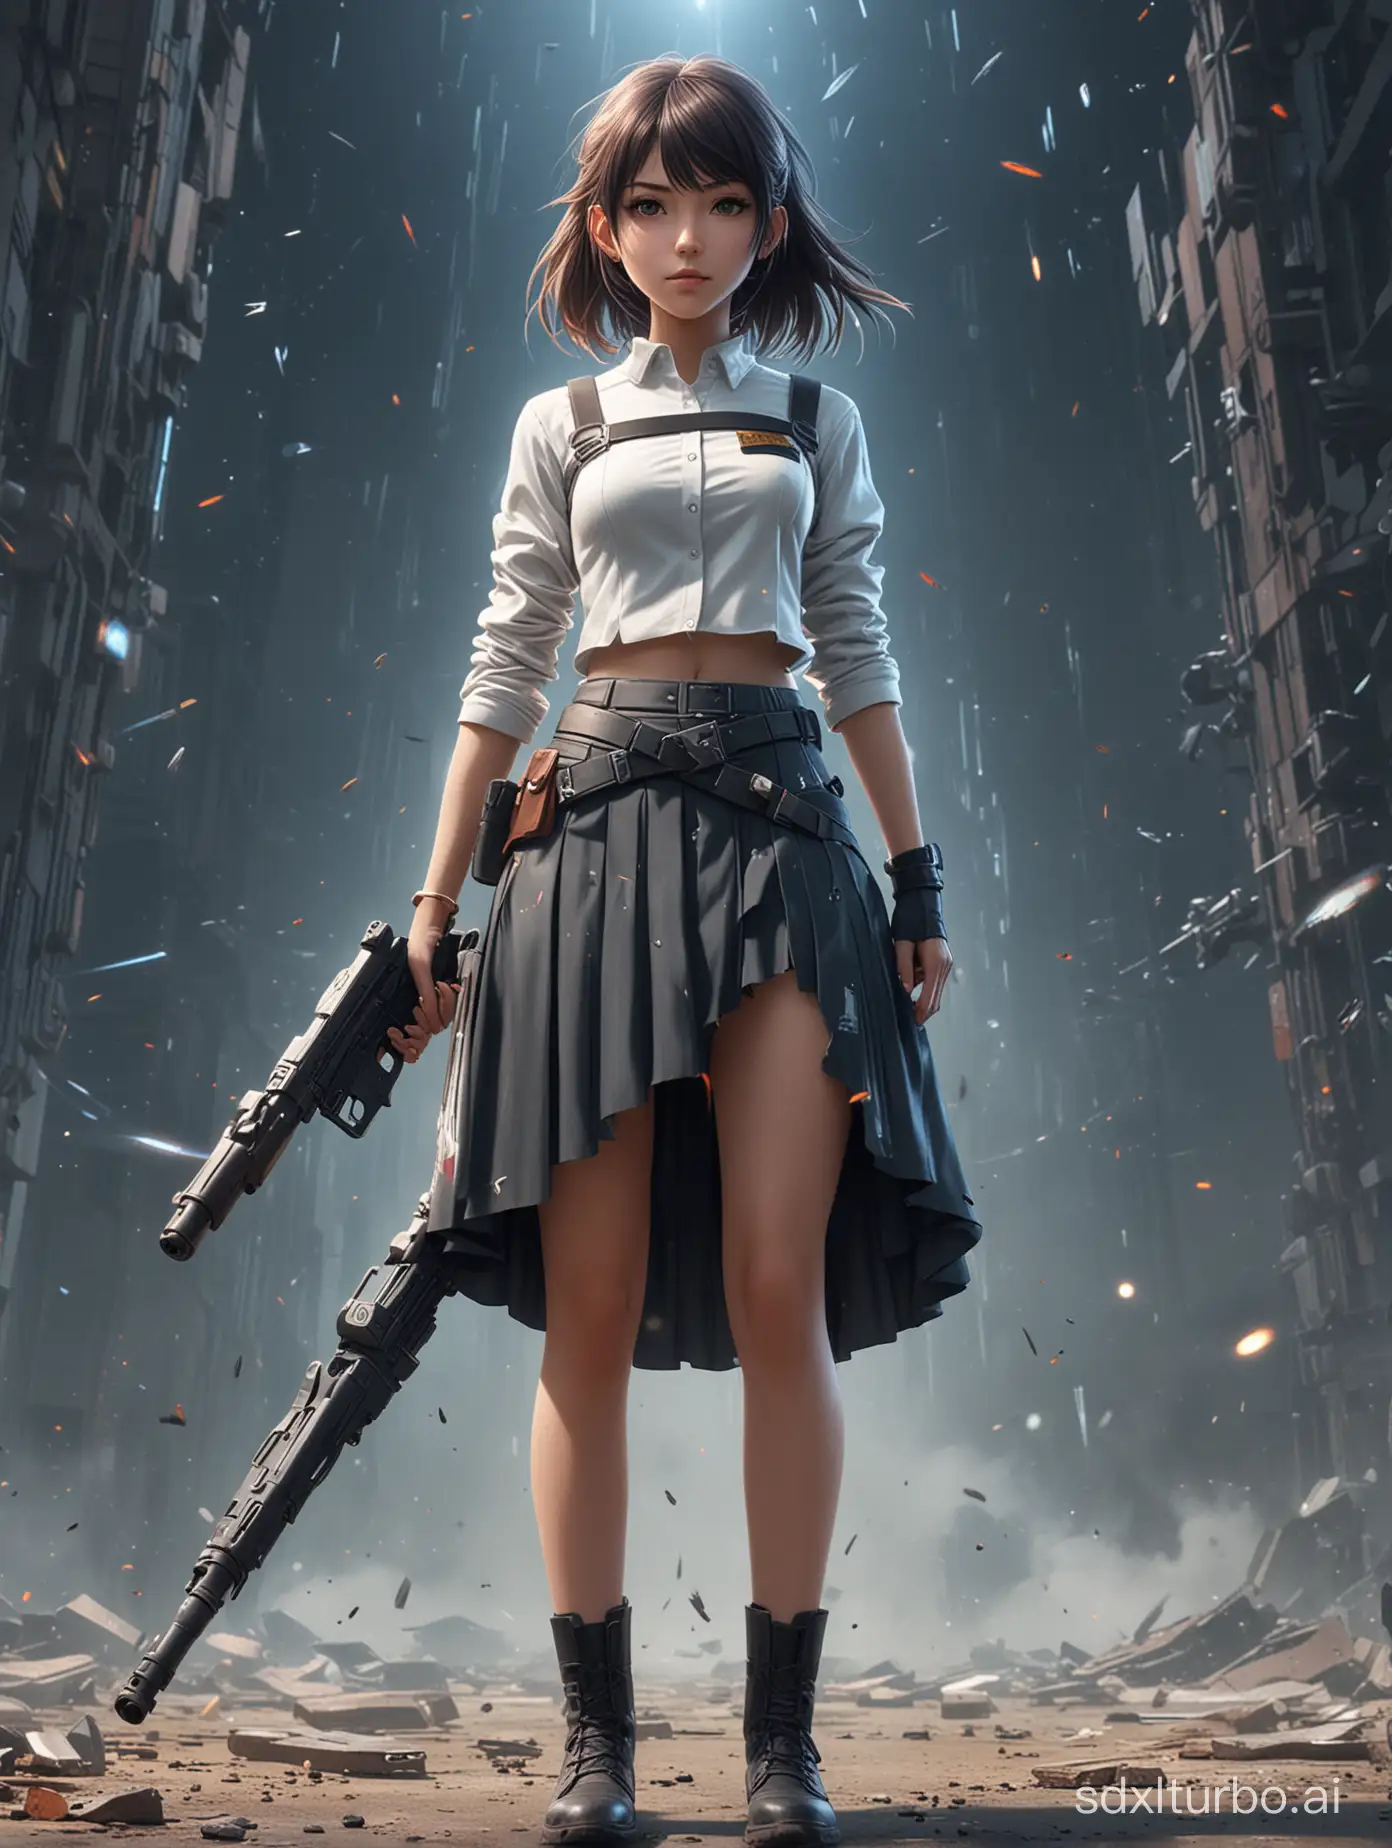 Design a captivating sci-fi movie style poster featuring a rendered anime girl in a skirt, portrayed in full body and armed with a shooting bullet.